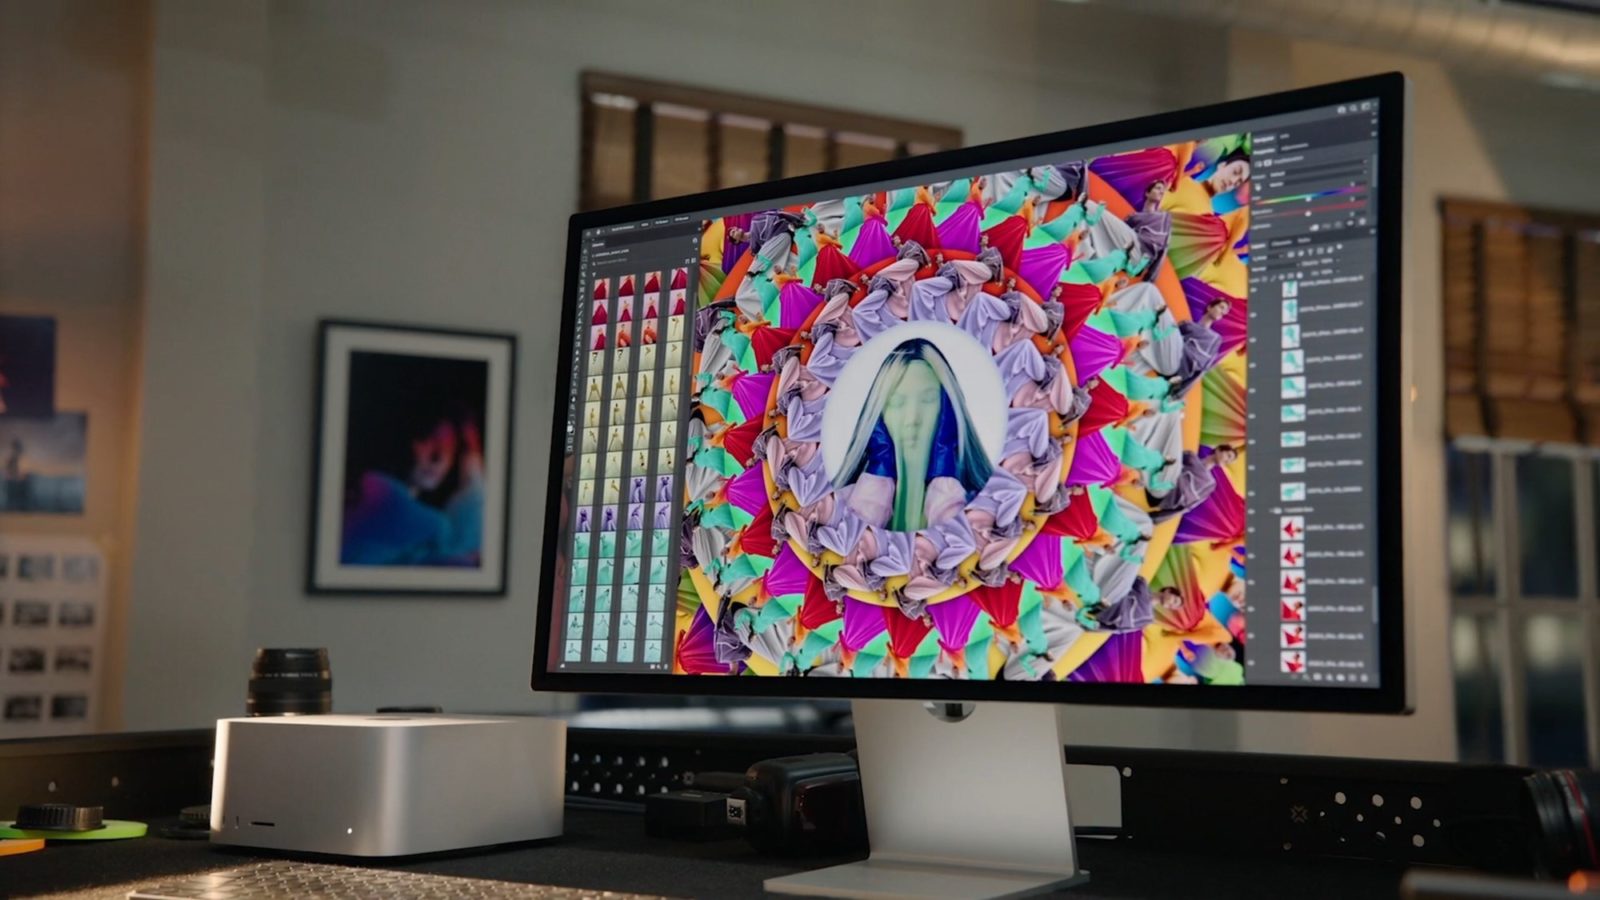 Apple aims to fix Studio Display problems quickly with software